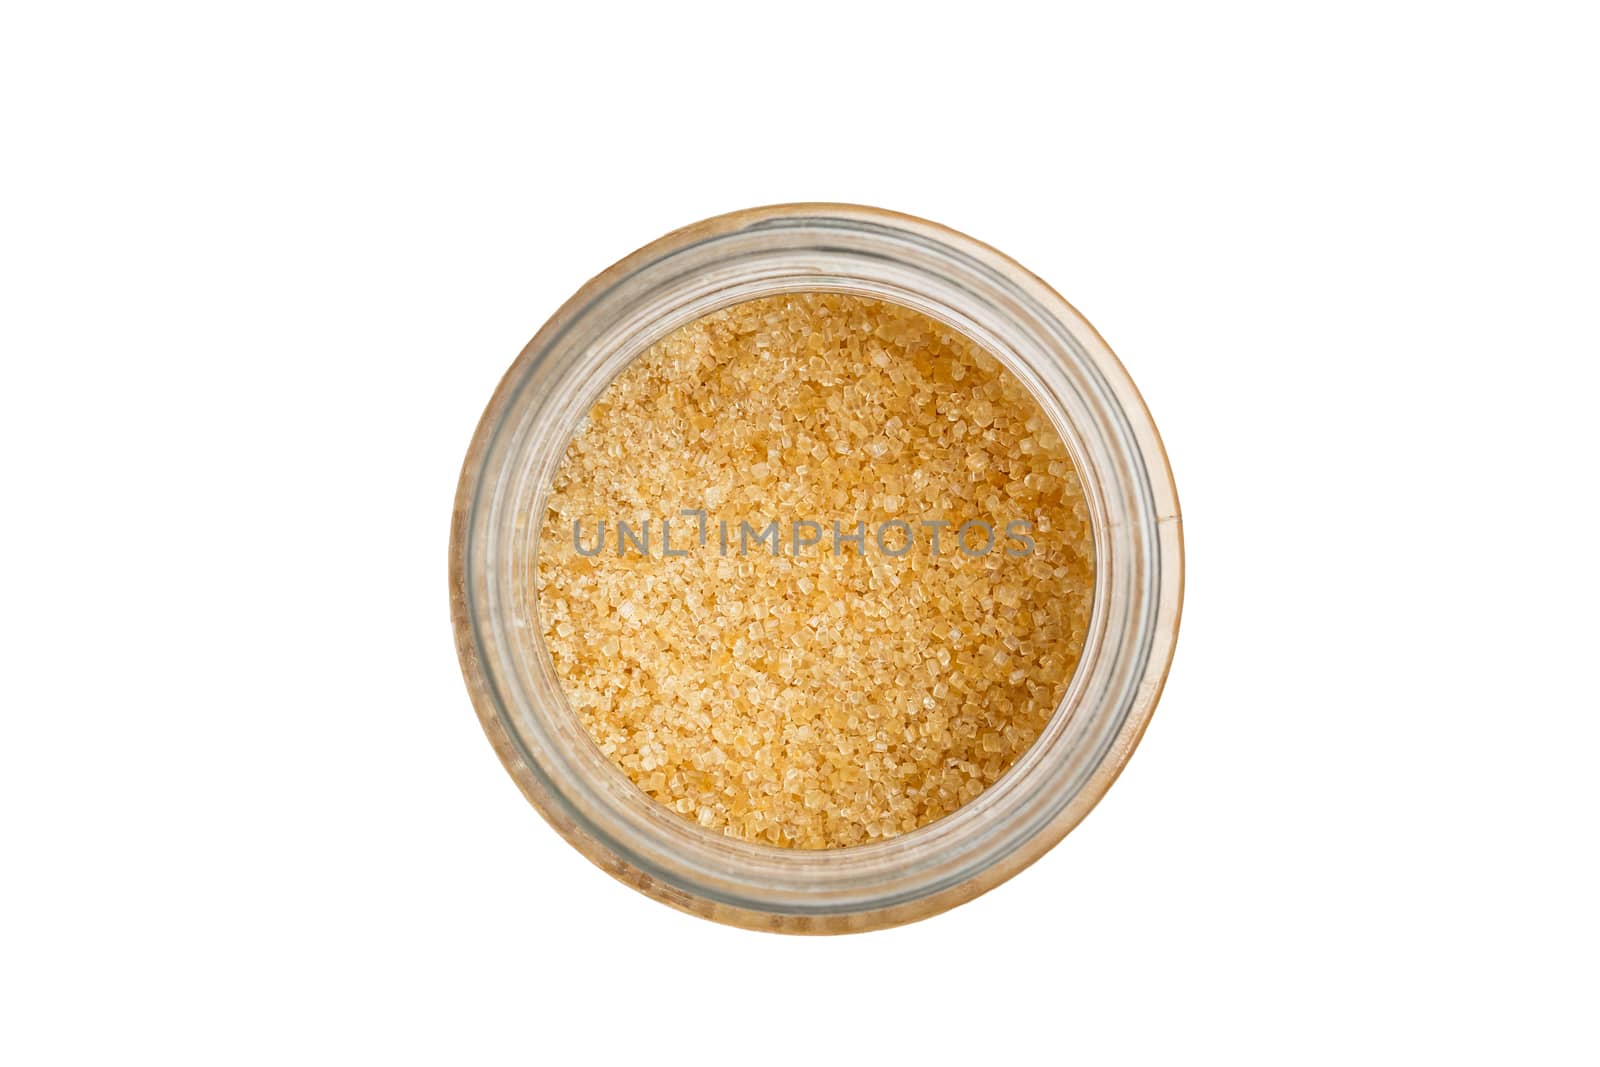 Isolated brown sugar in jar with white background.